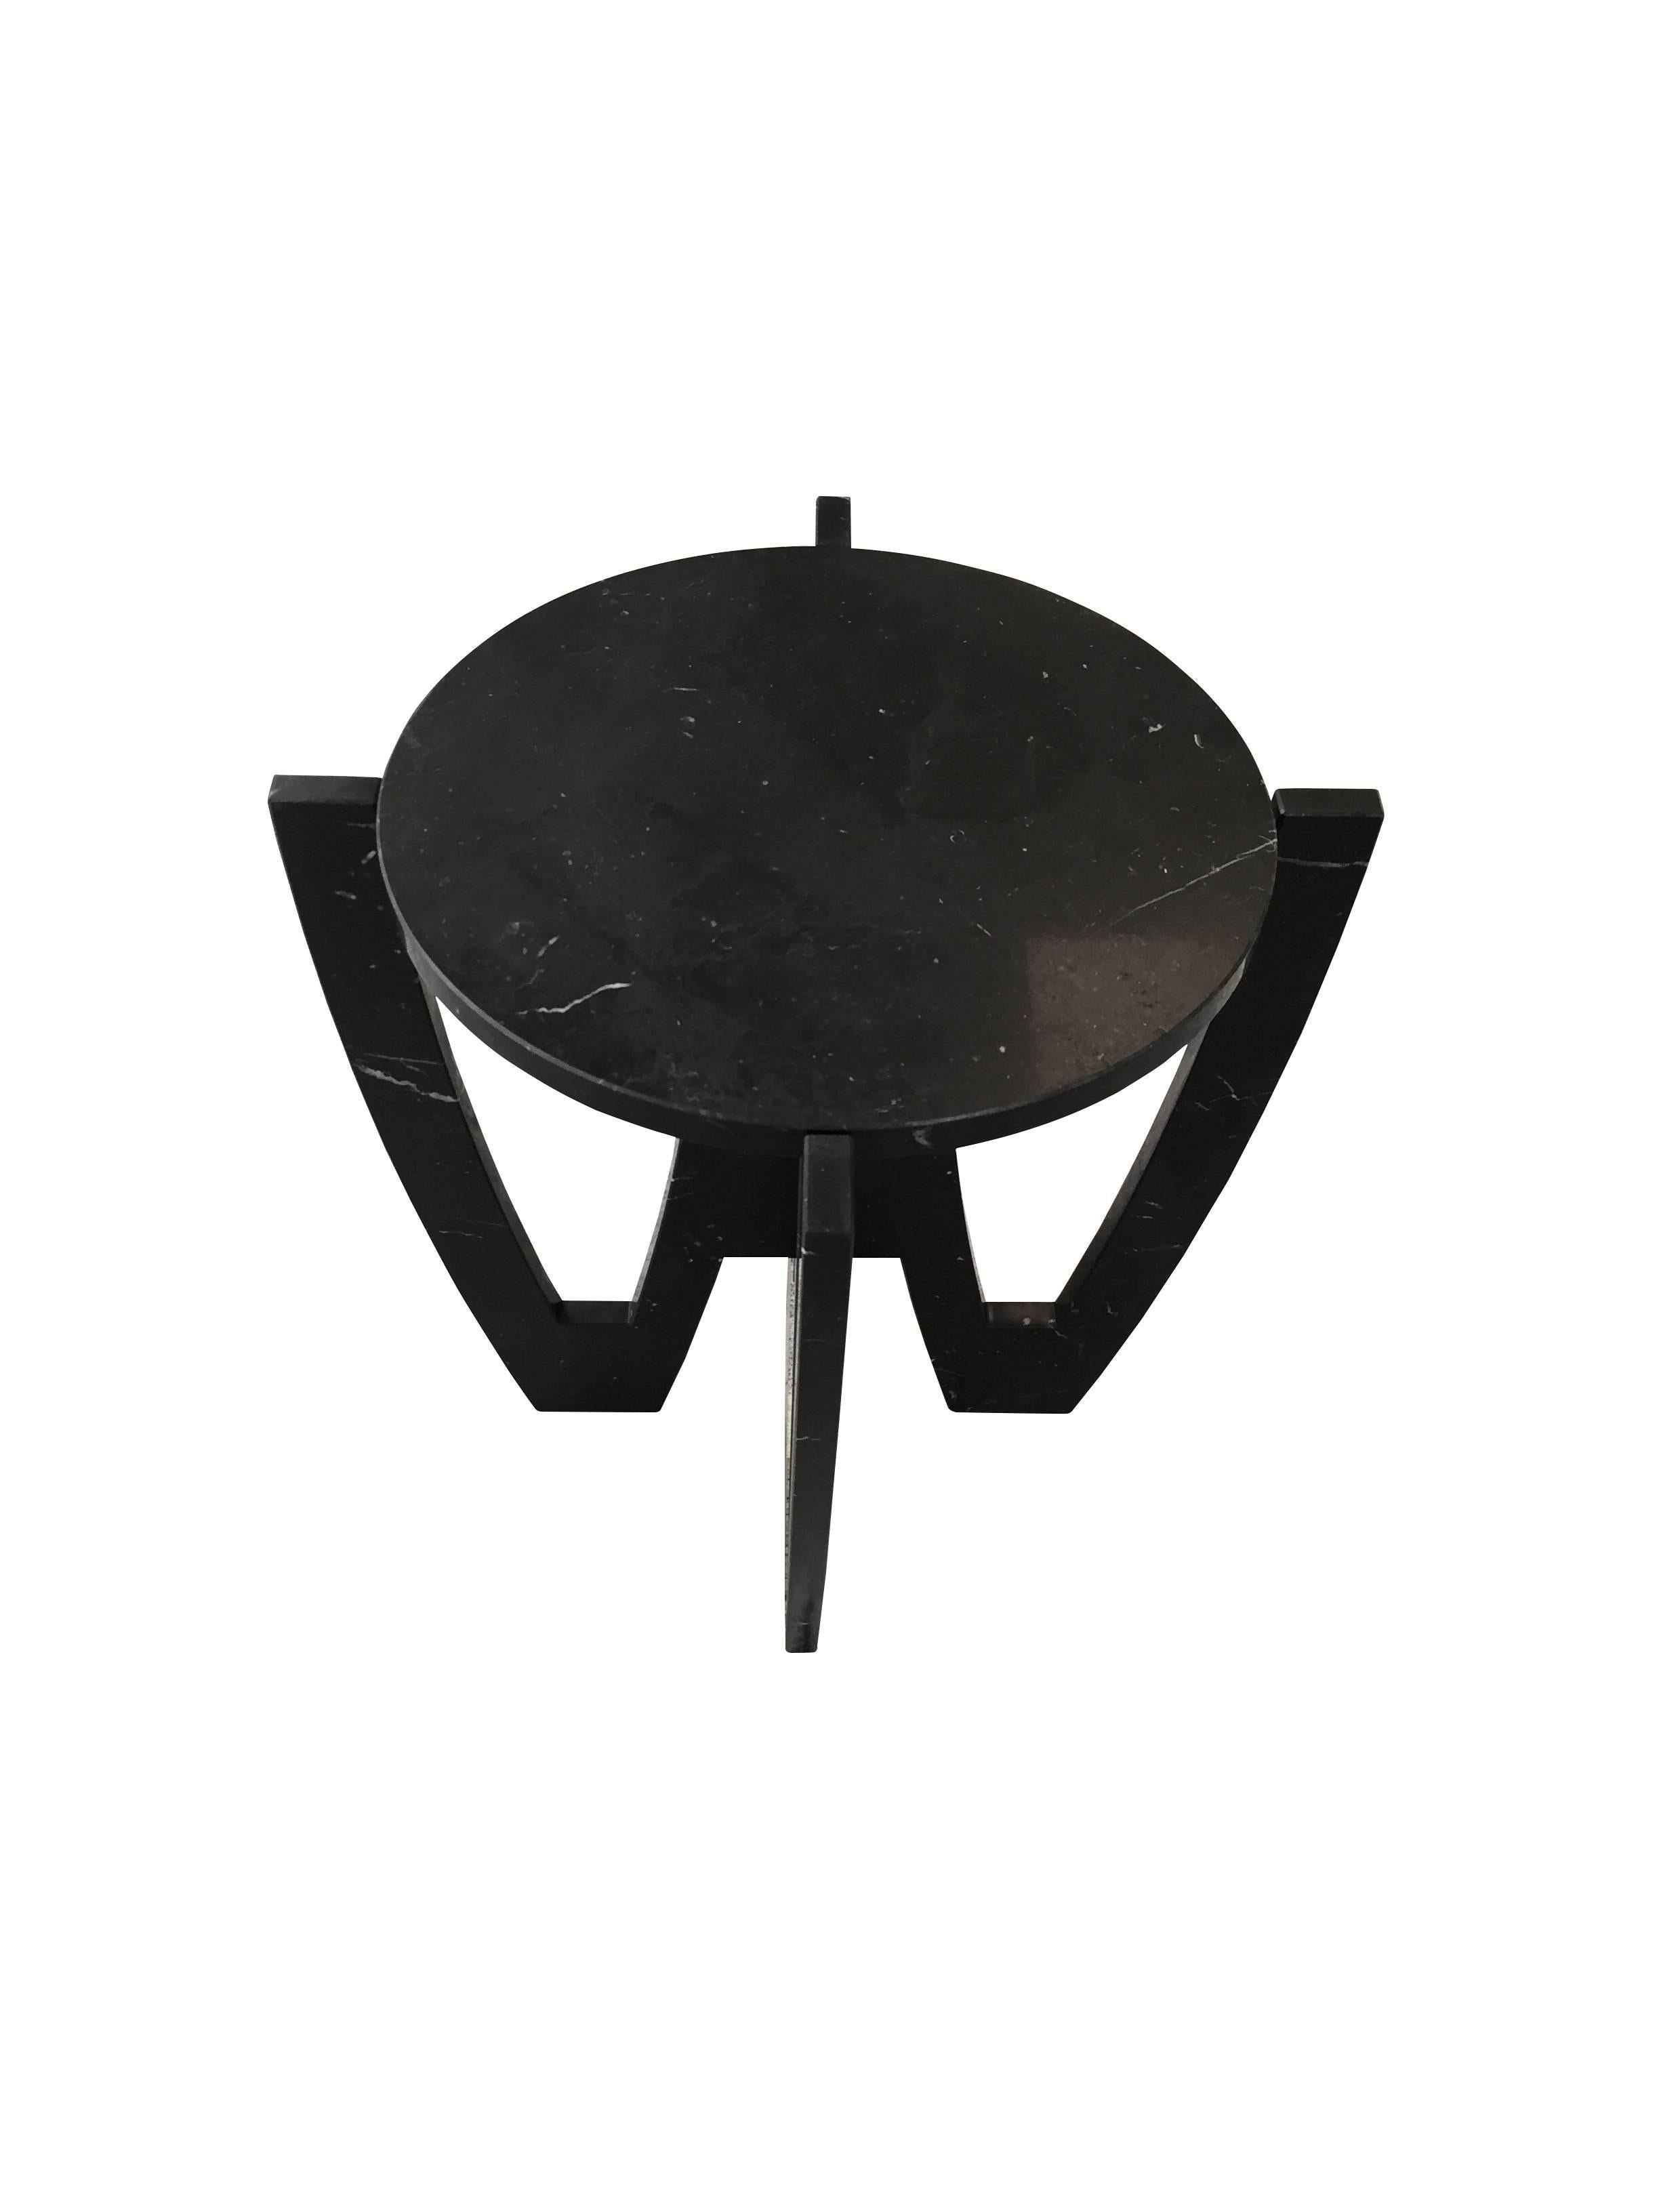 Contemporary round Italian black marble top sits in a very architectural, sculptural base also made of same black marble.
      